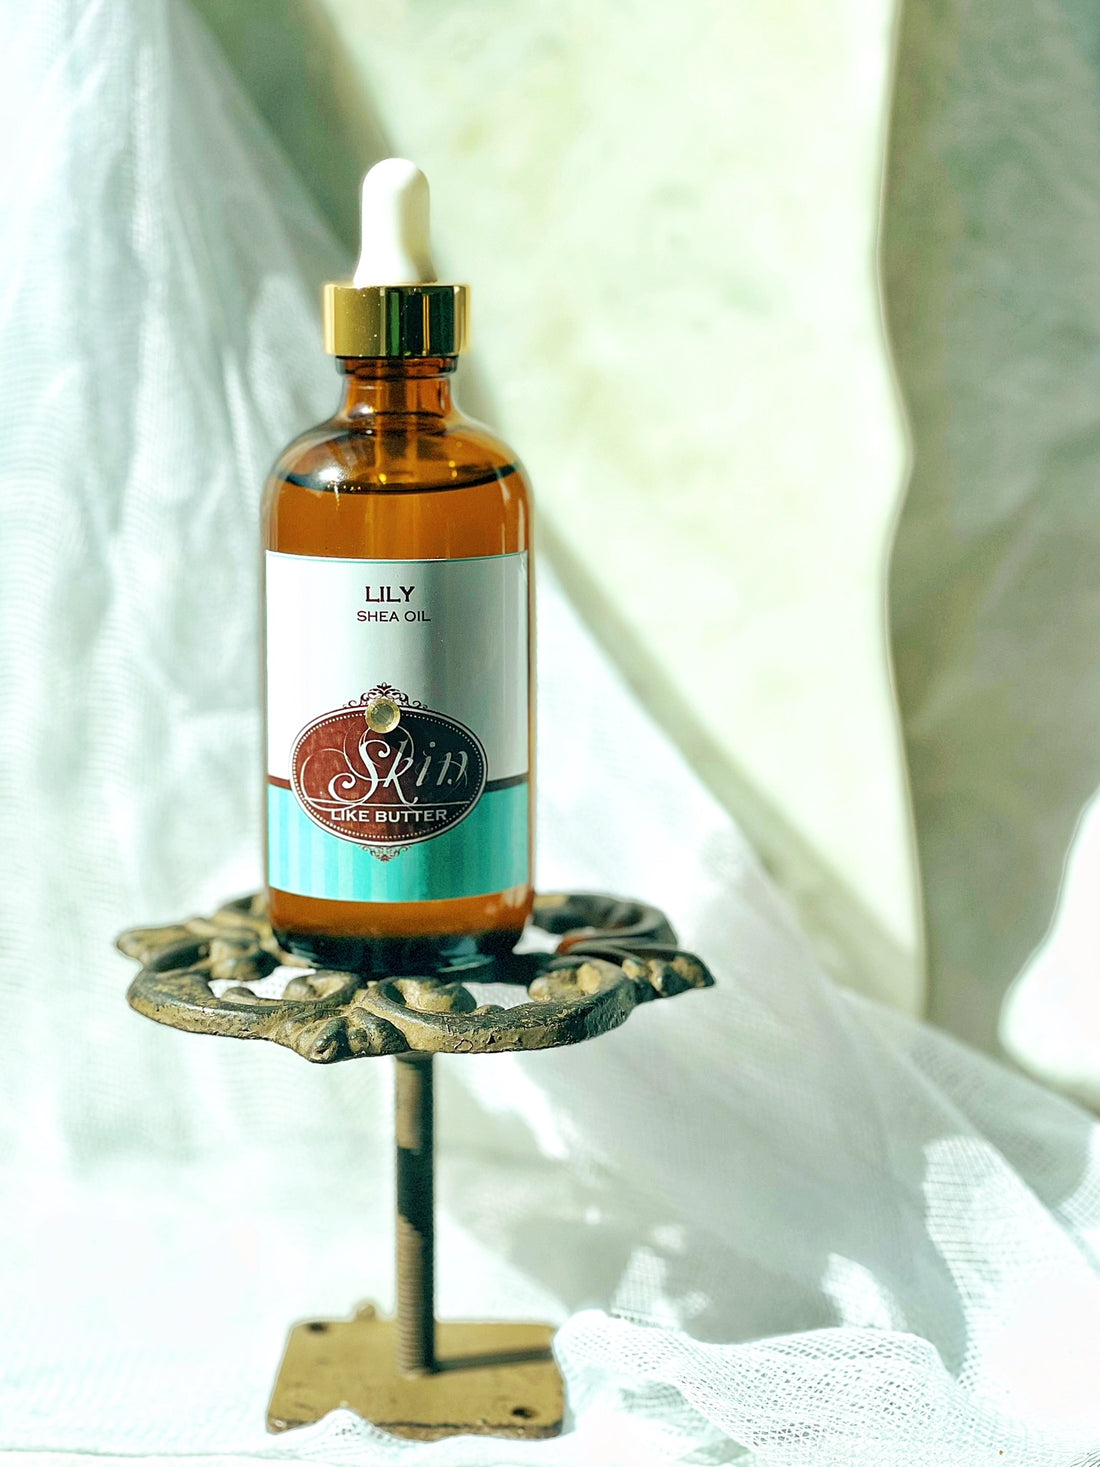 LILY - Scented Shea Oil - in 4 oz bottles, highly moisturizing